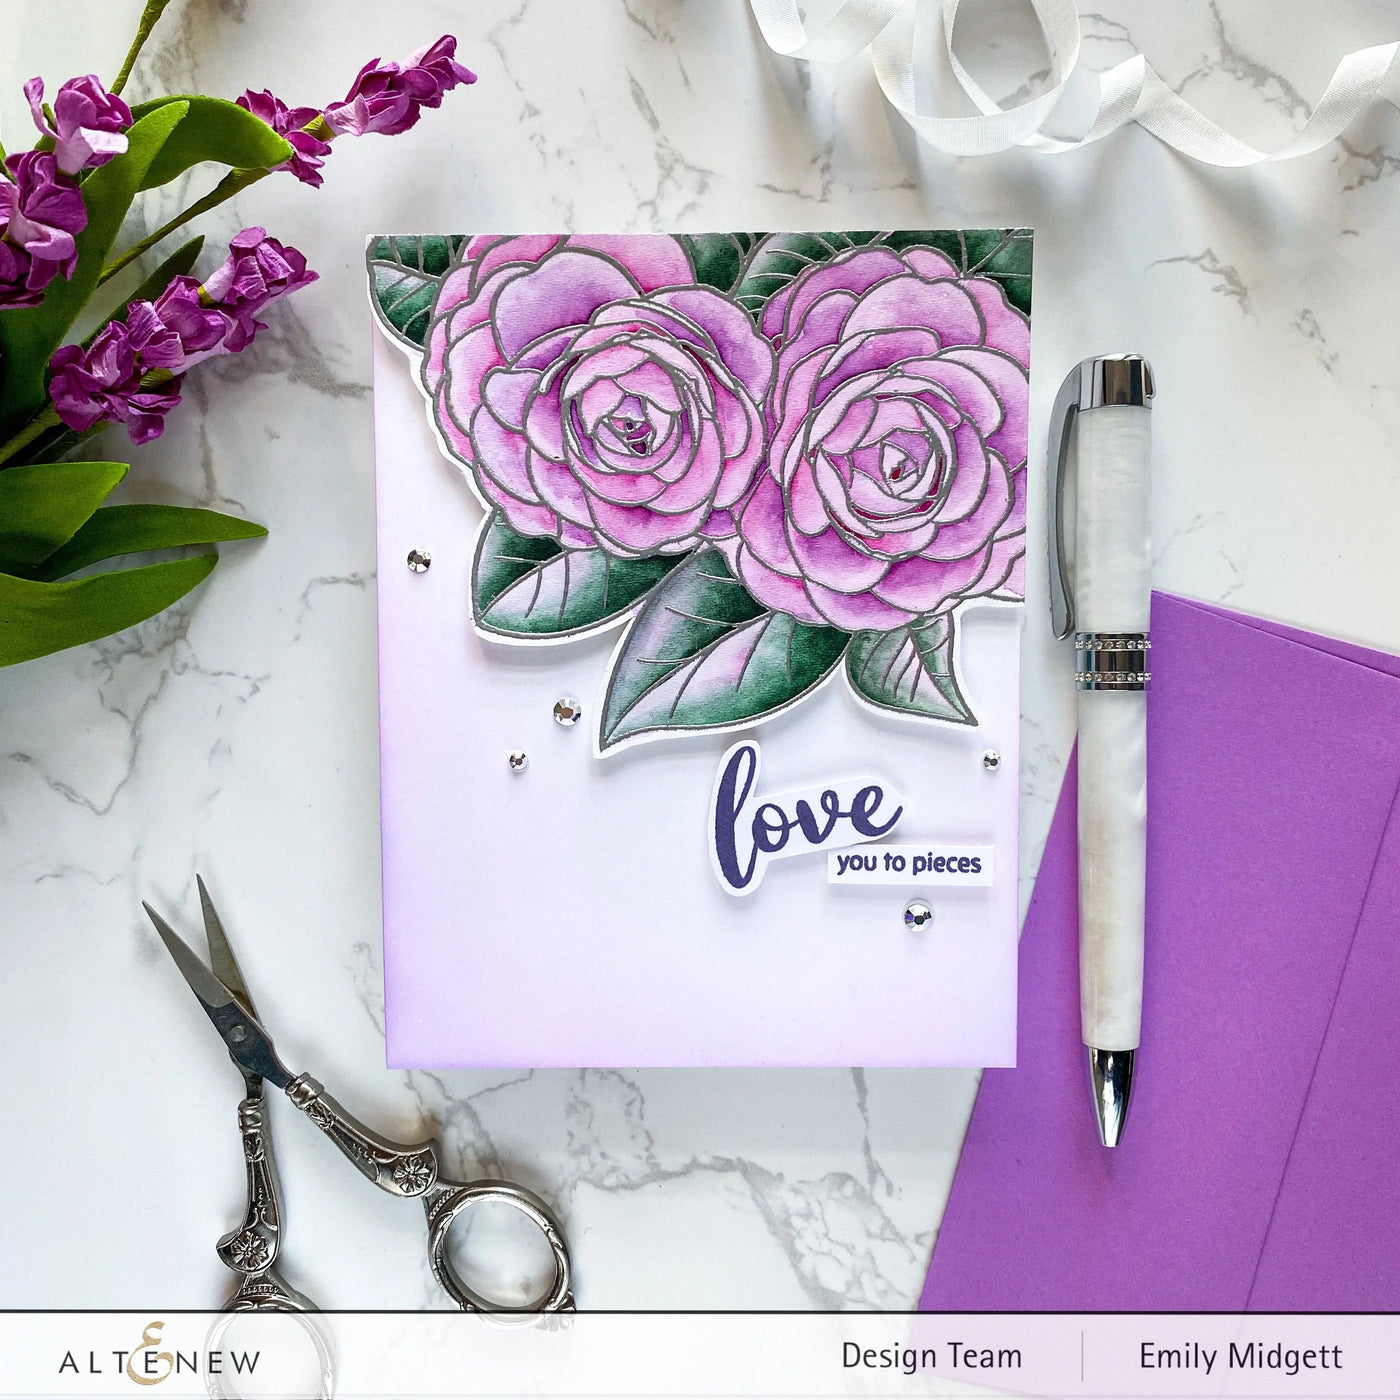 Clear Stamps Paint-A-Flower: Camellia Waterhouse Outline Stamp Set